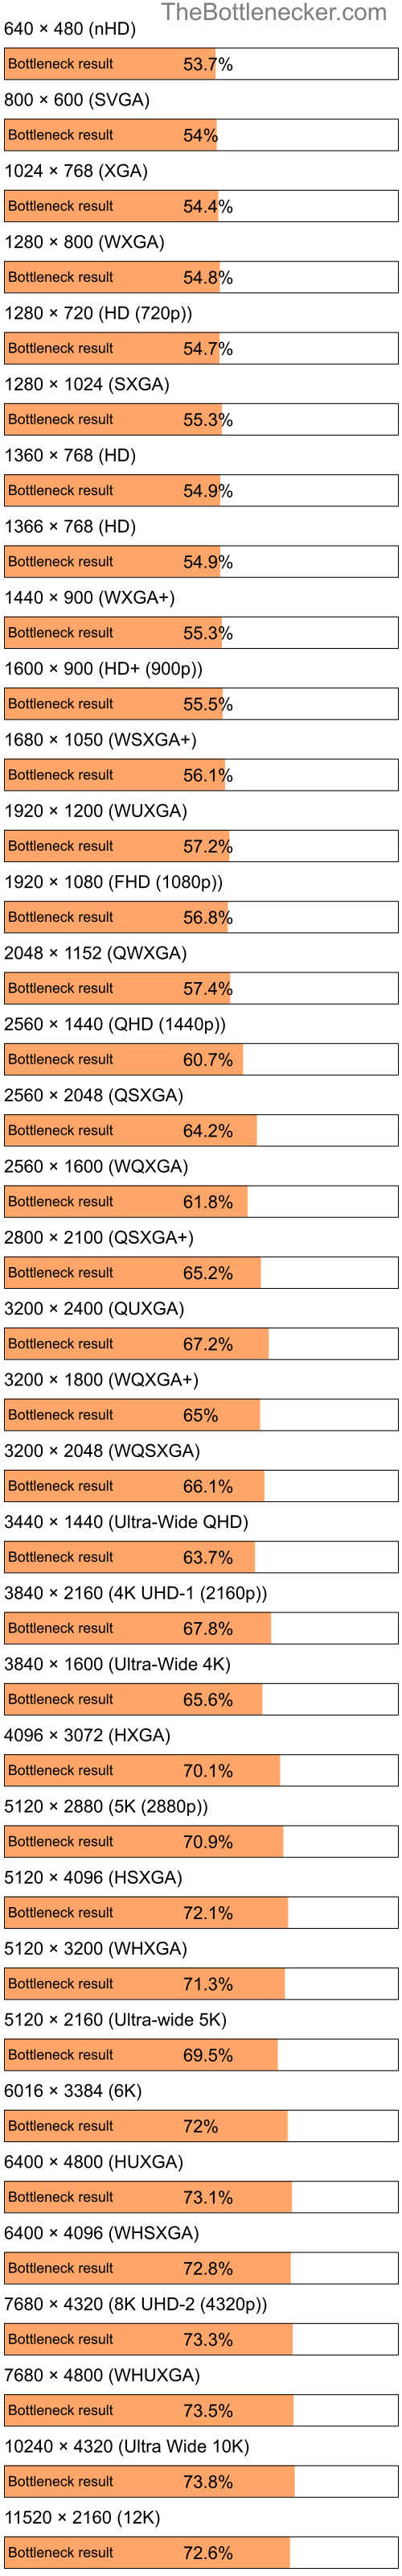 Bottleneck results by resolution for Intel Celeron and NVIDIA Quadro FX 540 in Processor Intense Tasks